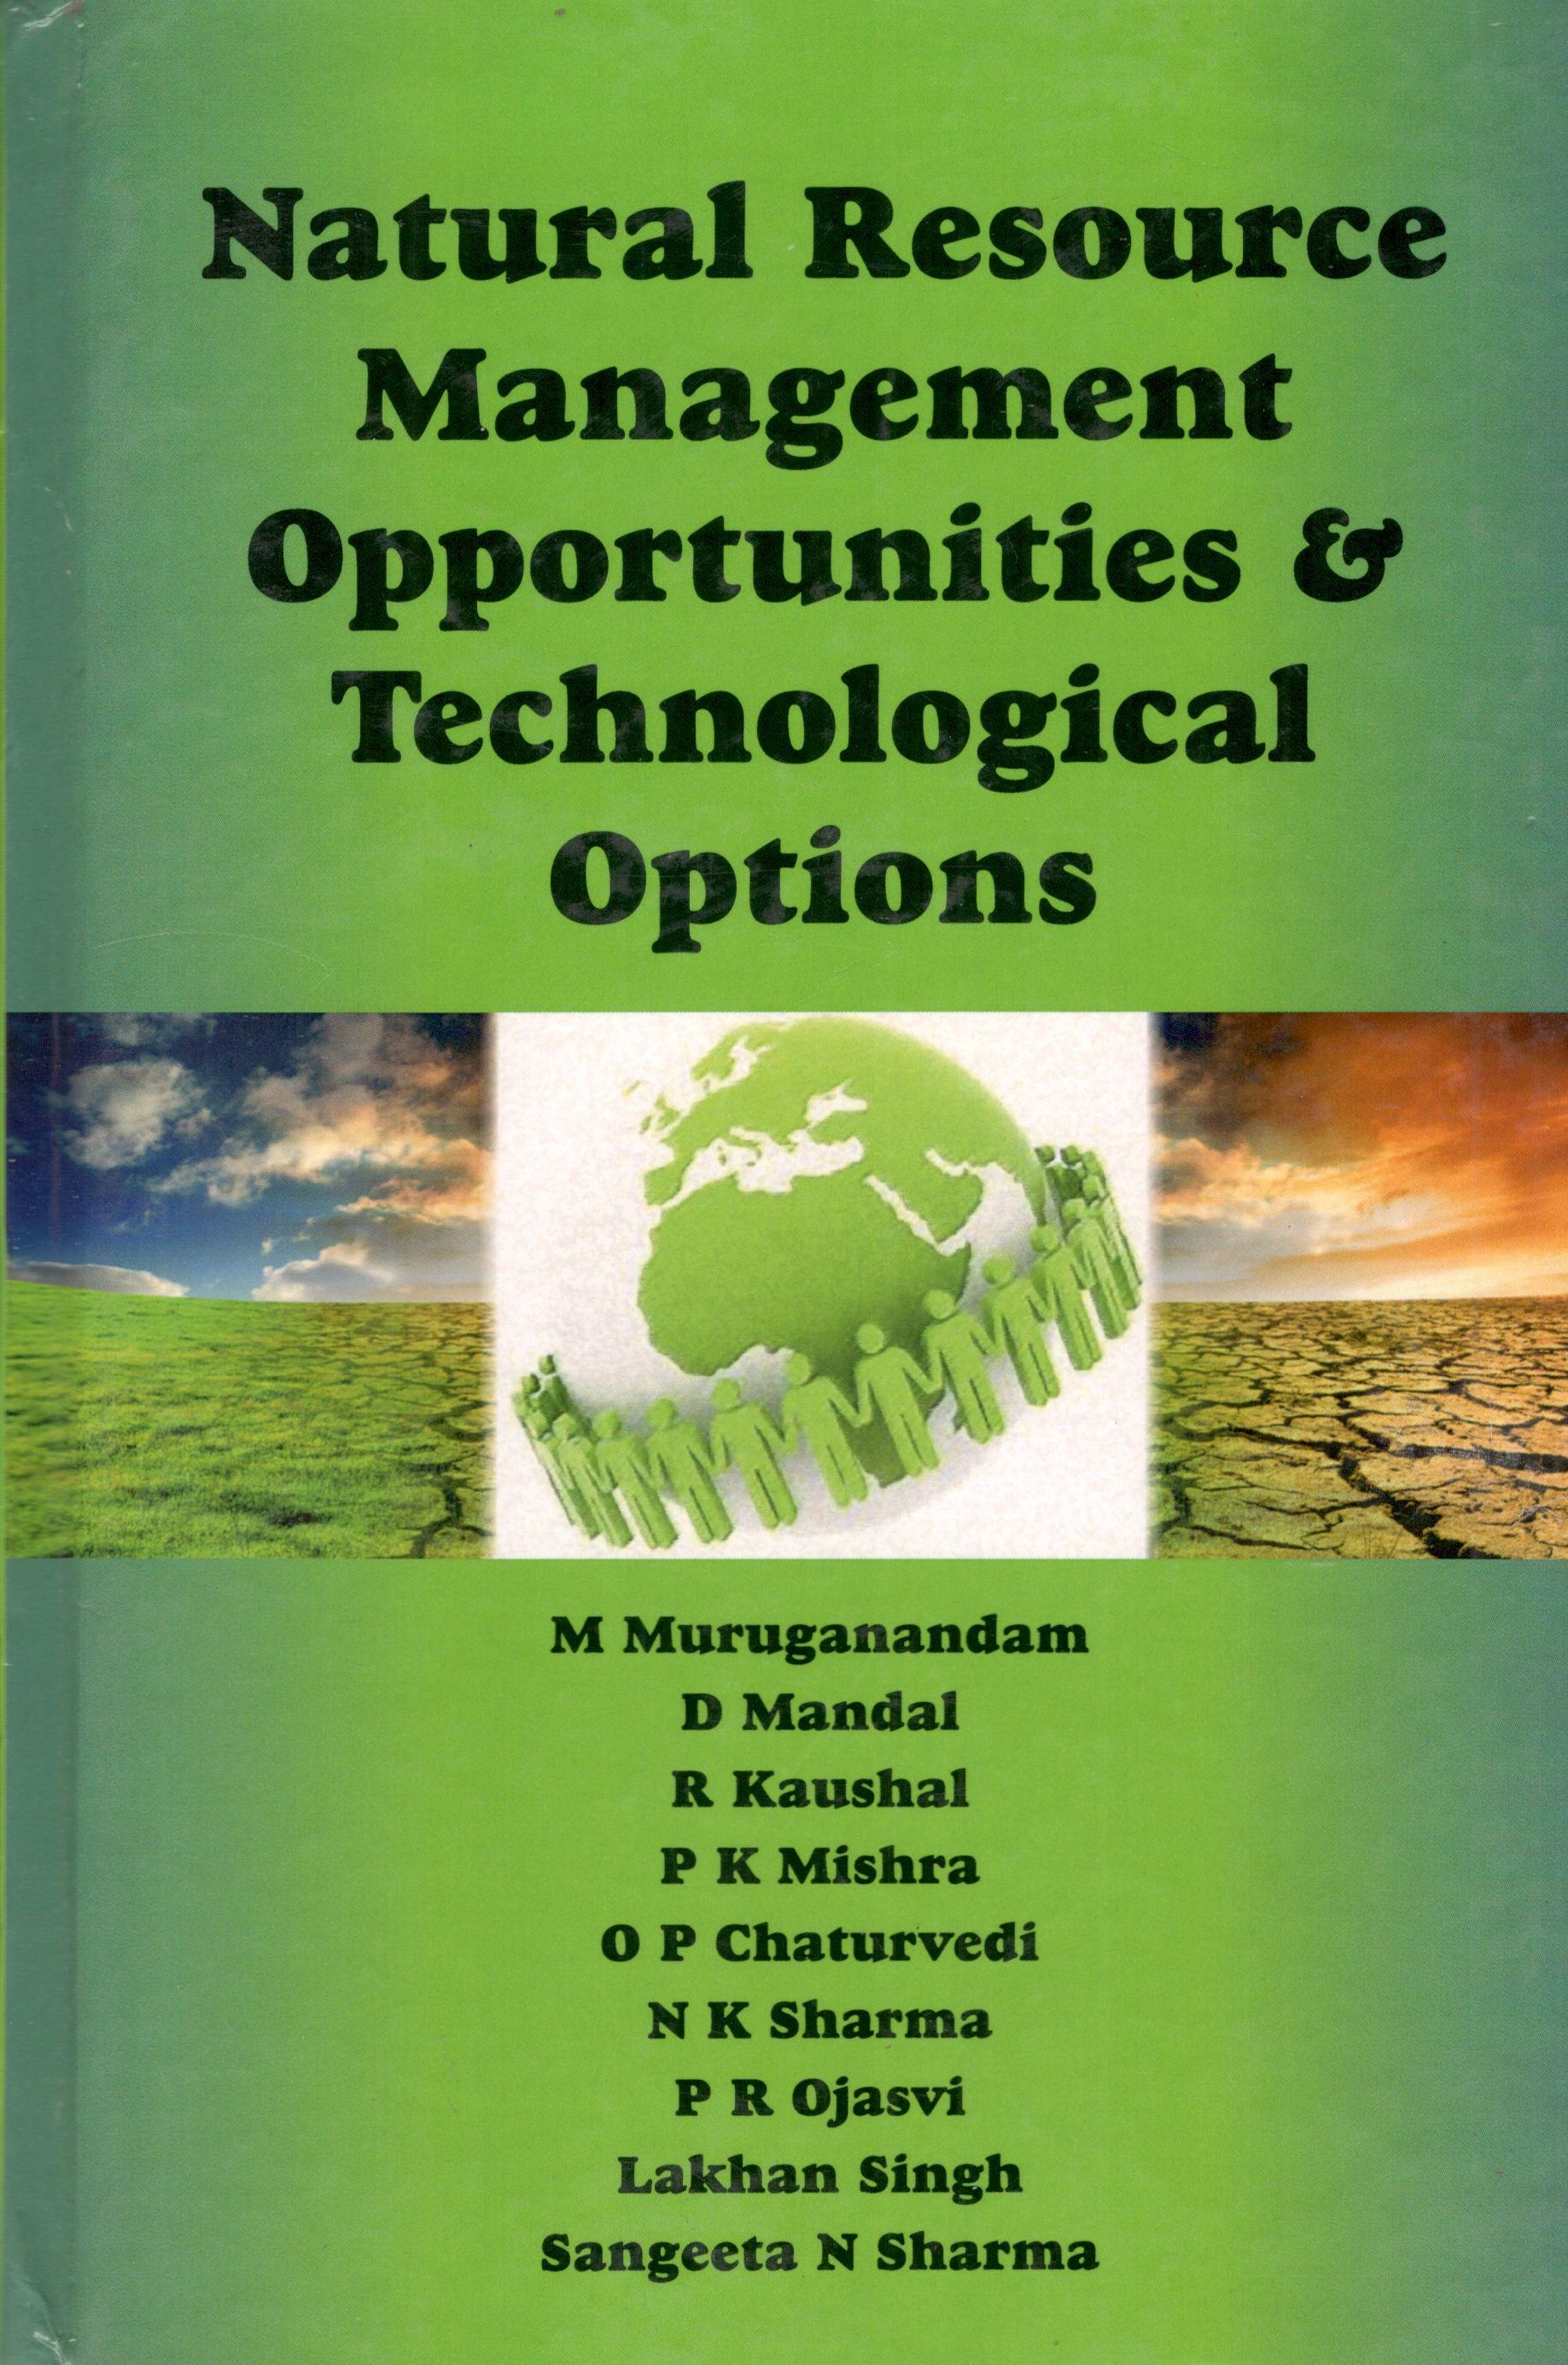 Natural Resource Management Opportunities & Technological Options